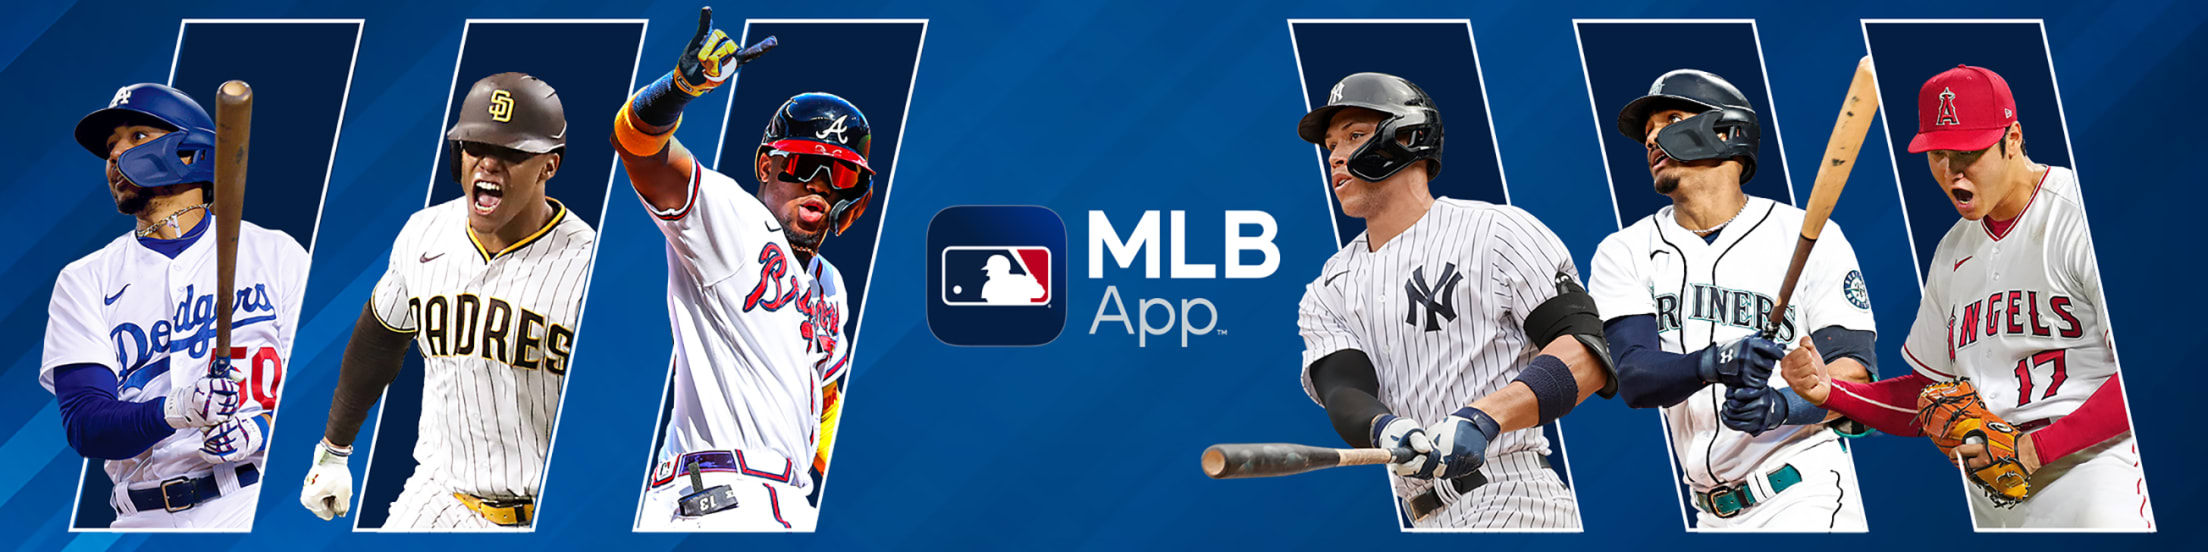 apps to watch mlb live